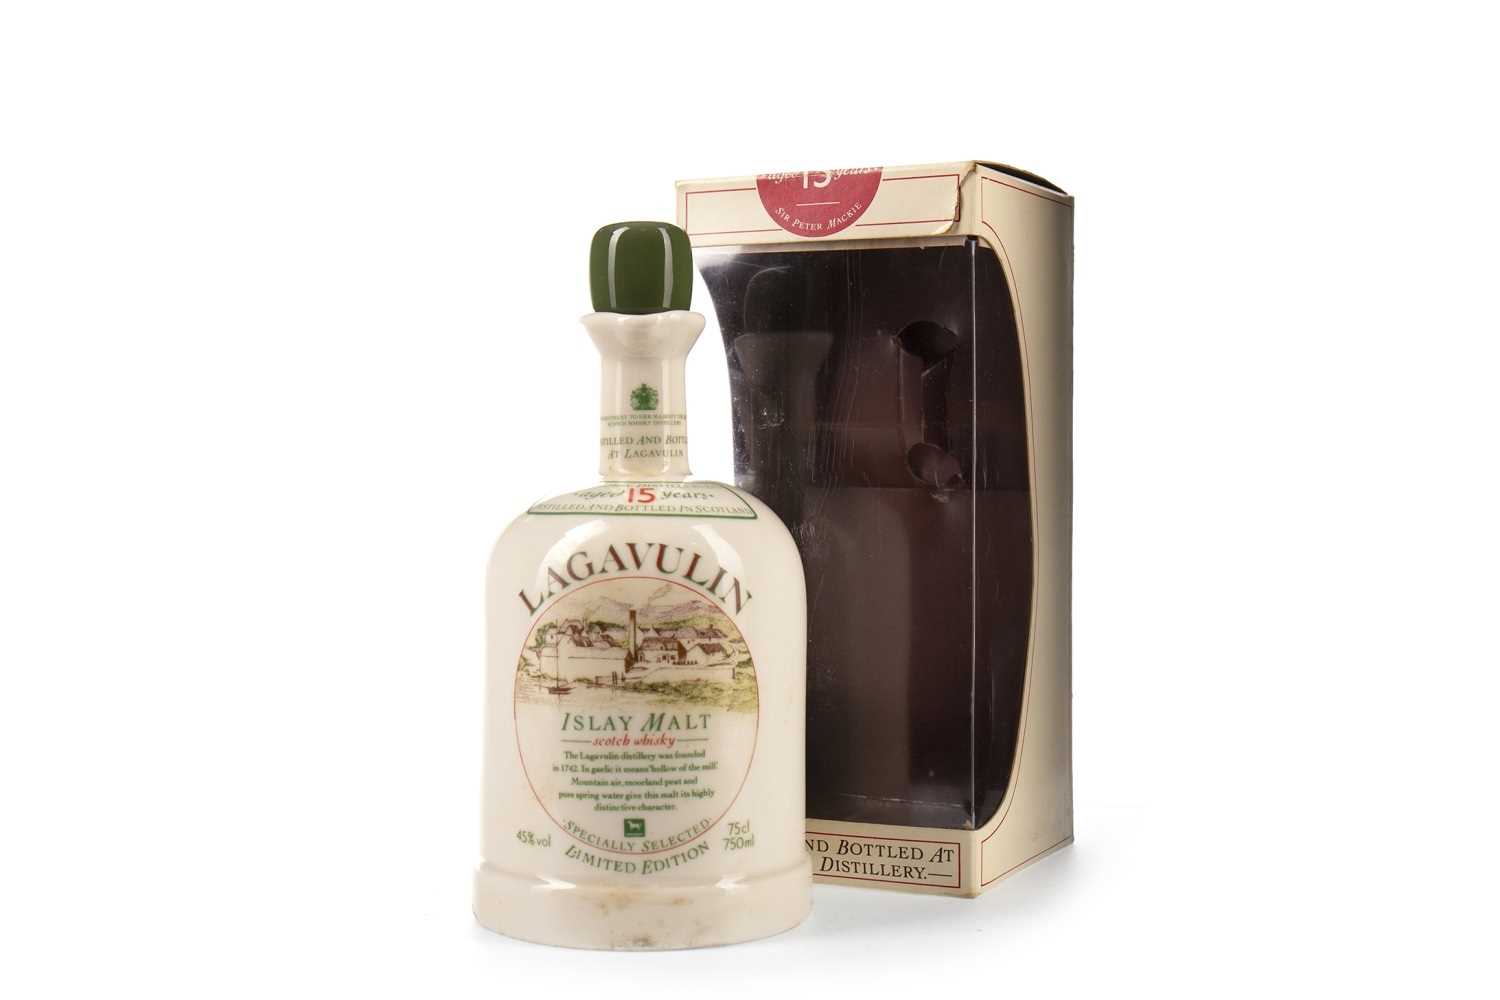 Lot 4 - LAGAVULIN WHITE HORSE DECANTER AGED 15 YEARS